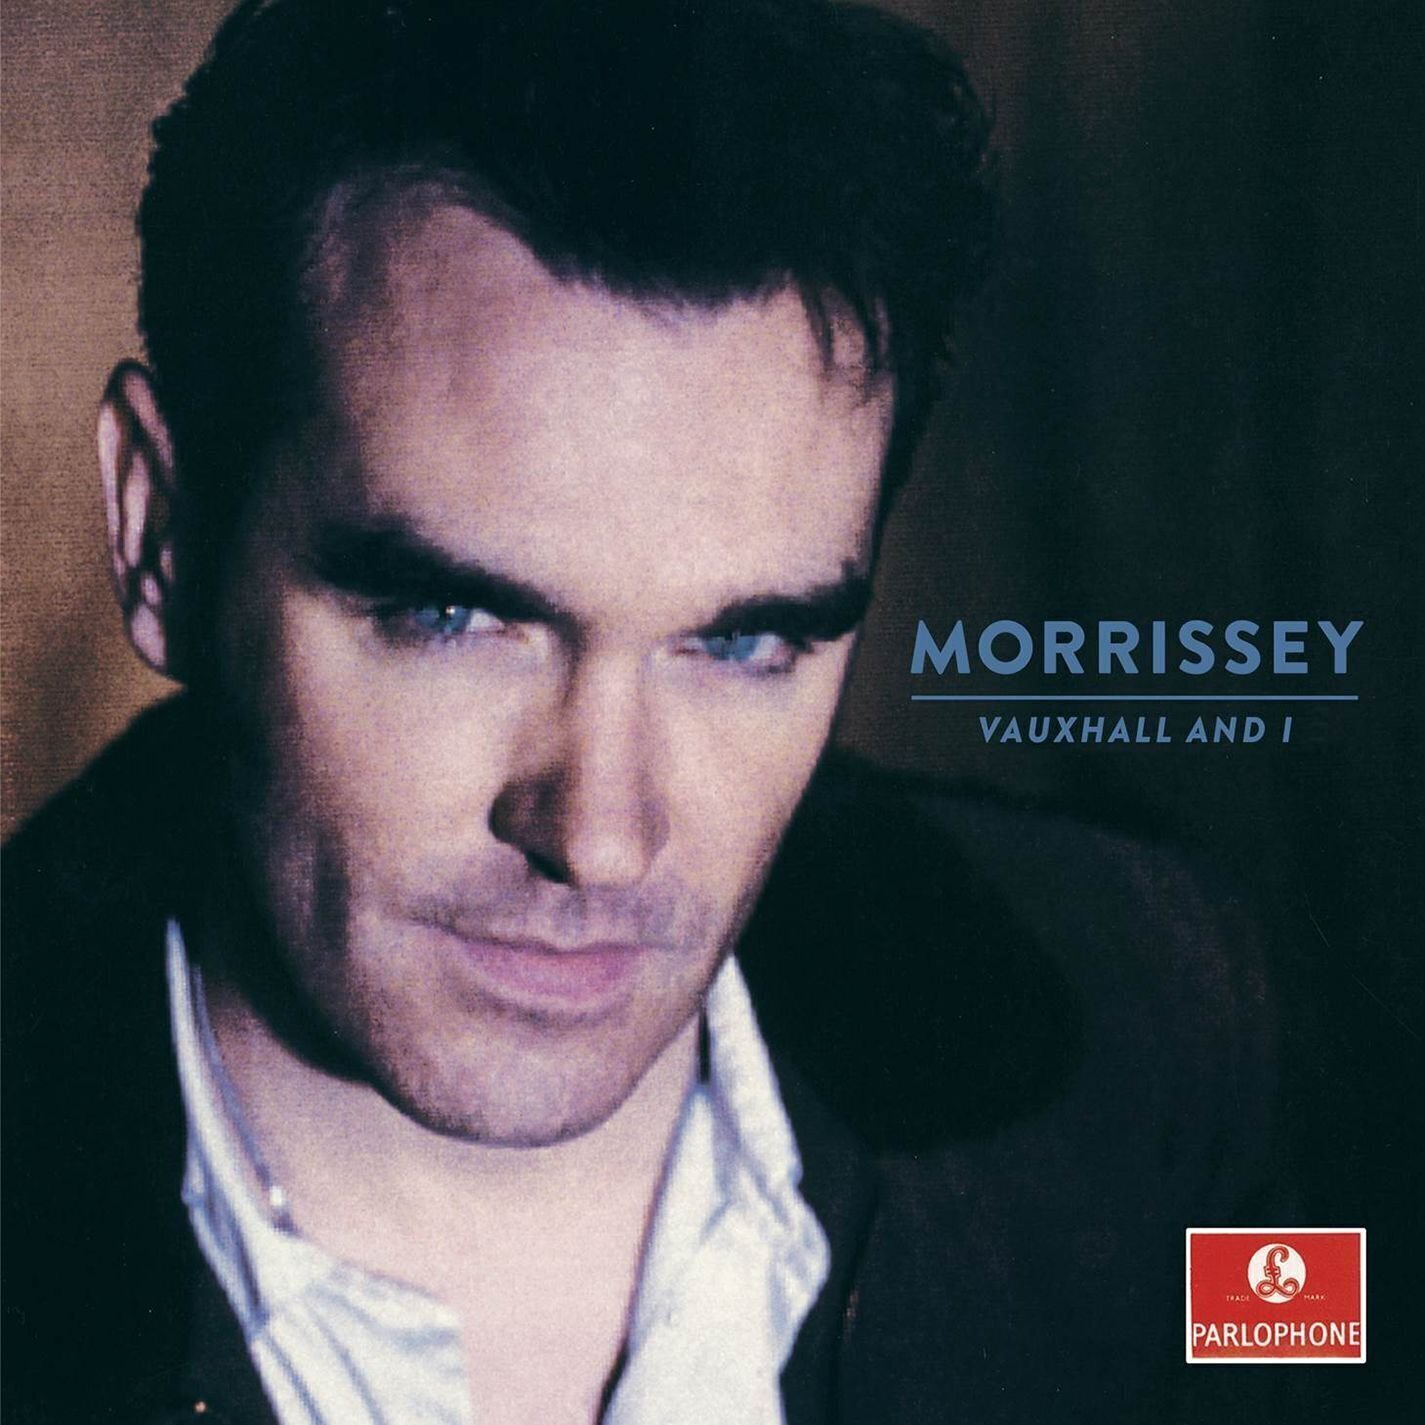 Vinyl Record Morrissey - Vauxhall And I (20th Anniversary Edition) (LP)